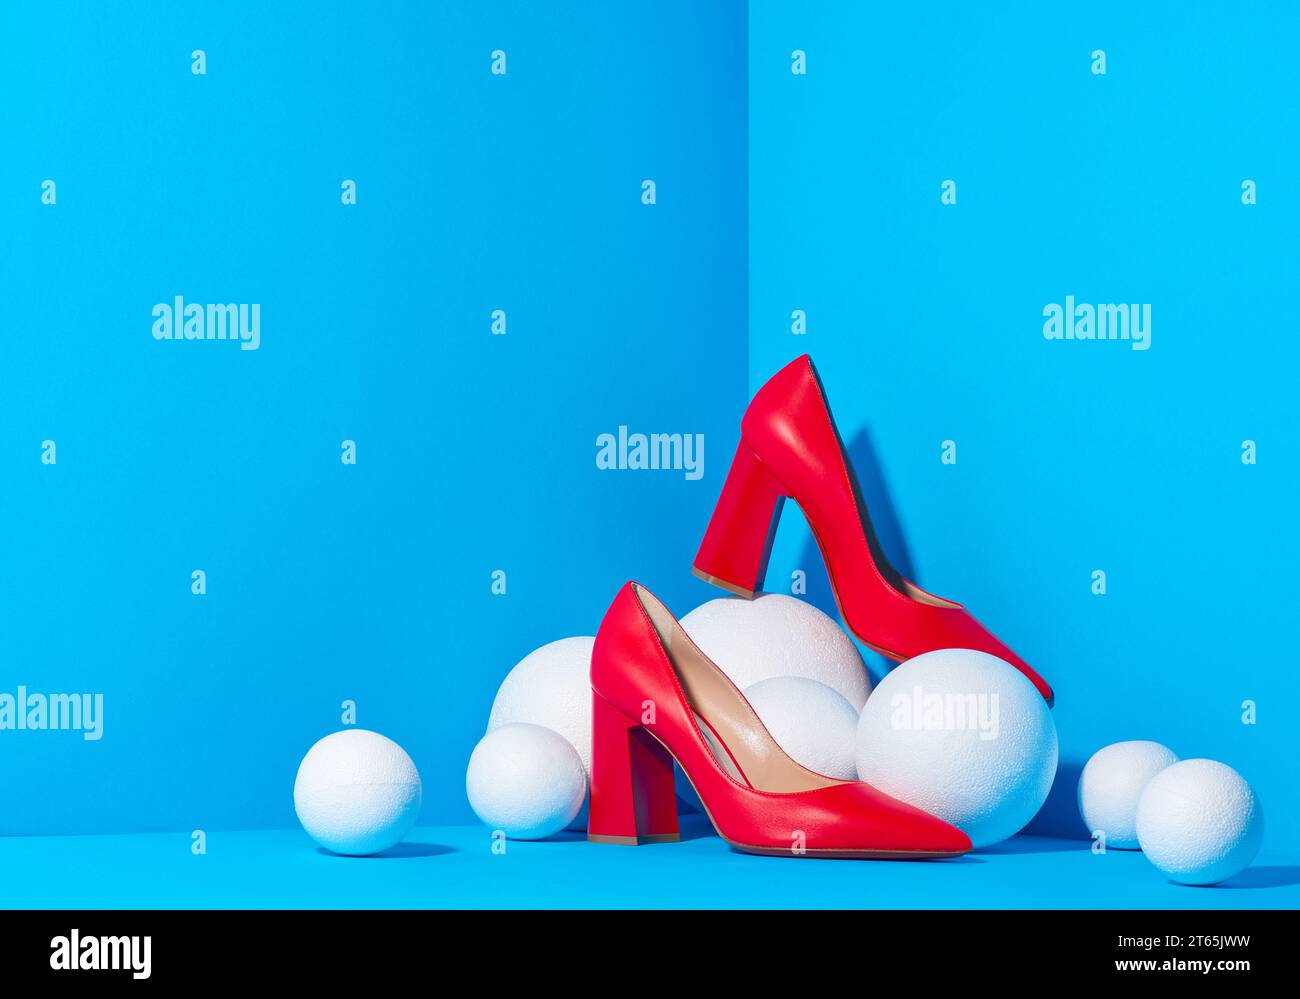 Stylish fashion female red high-heeled shoes are placed in a cube with a blue solid background and white balls around that resemble snowballs. There i Stock Photo